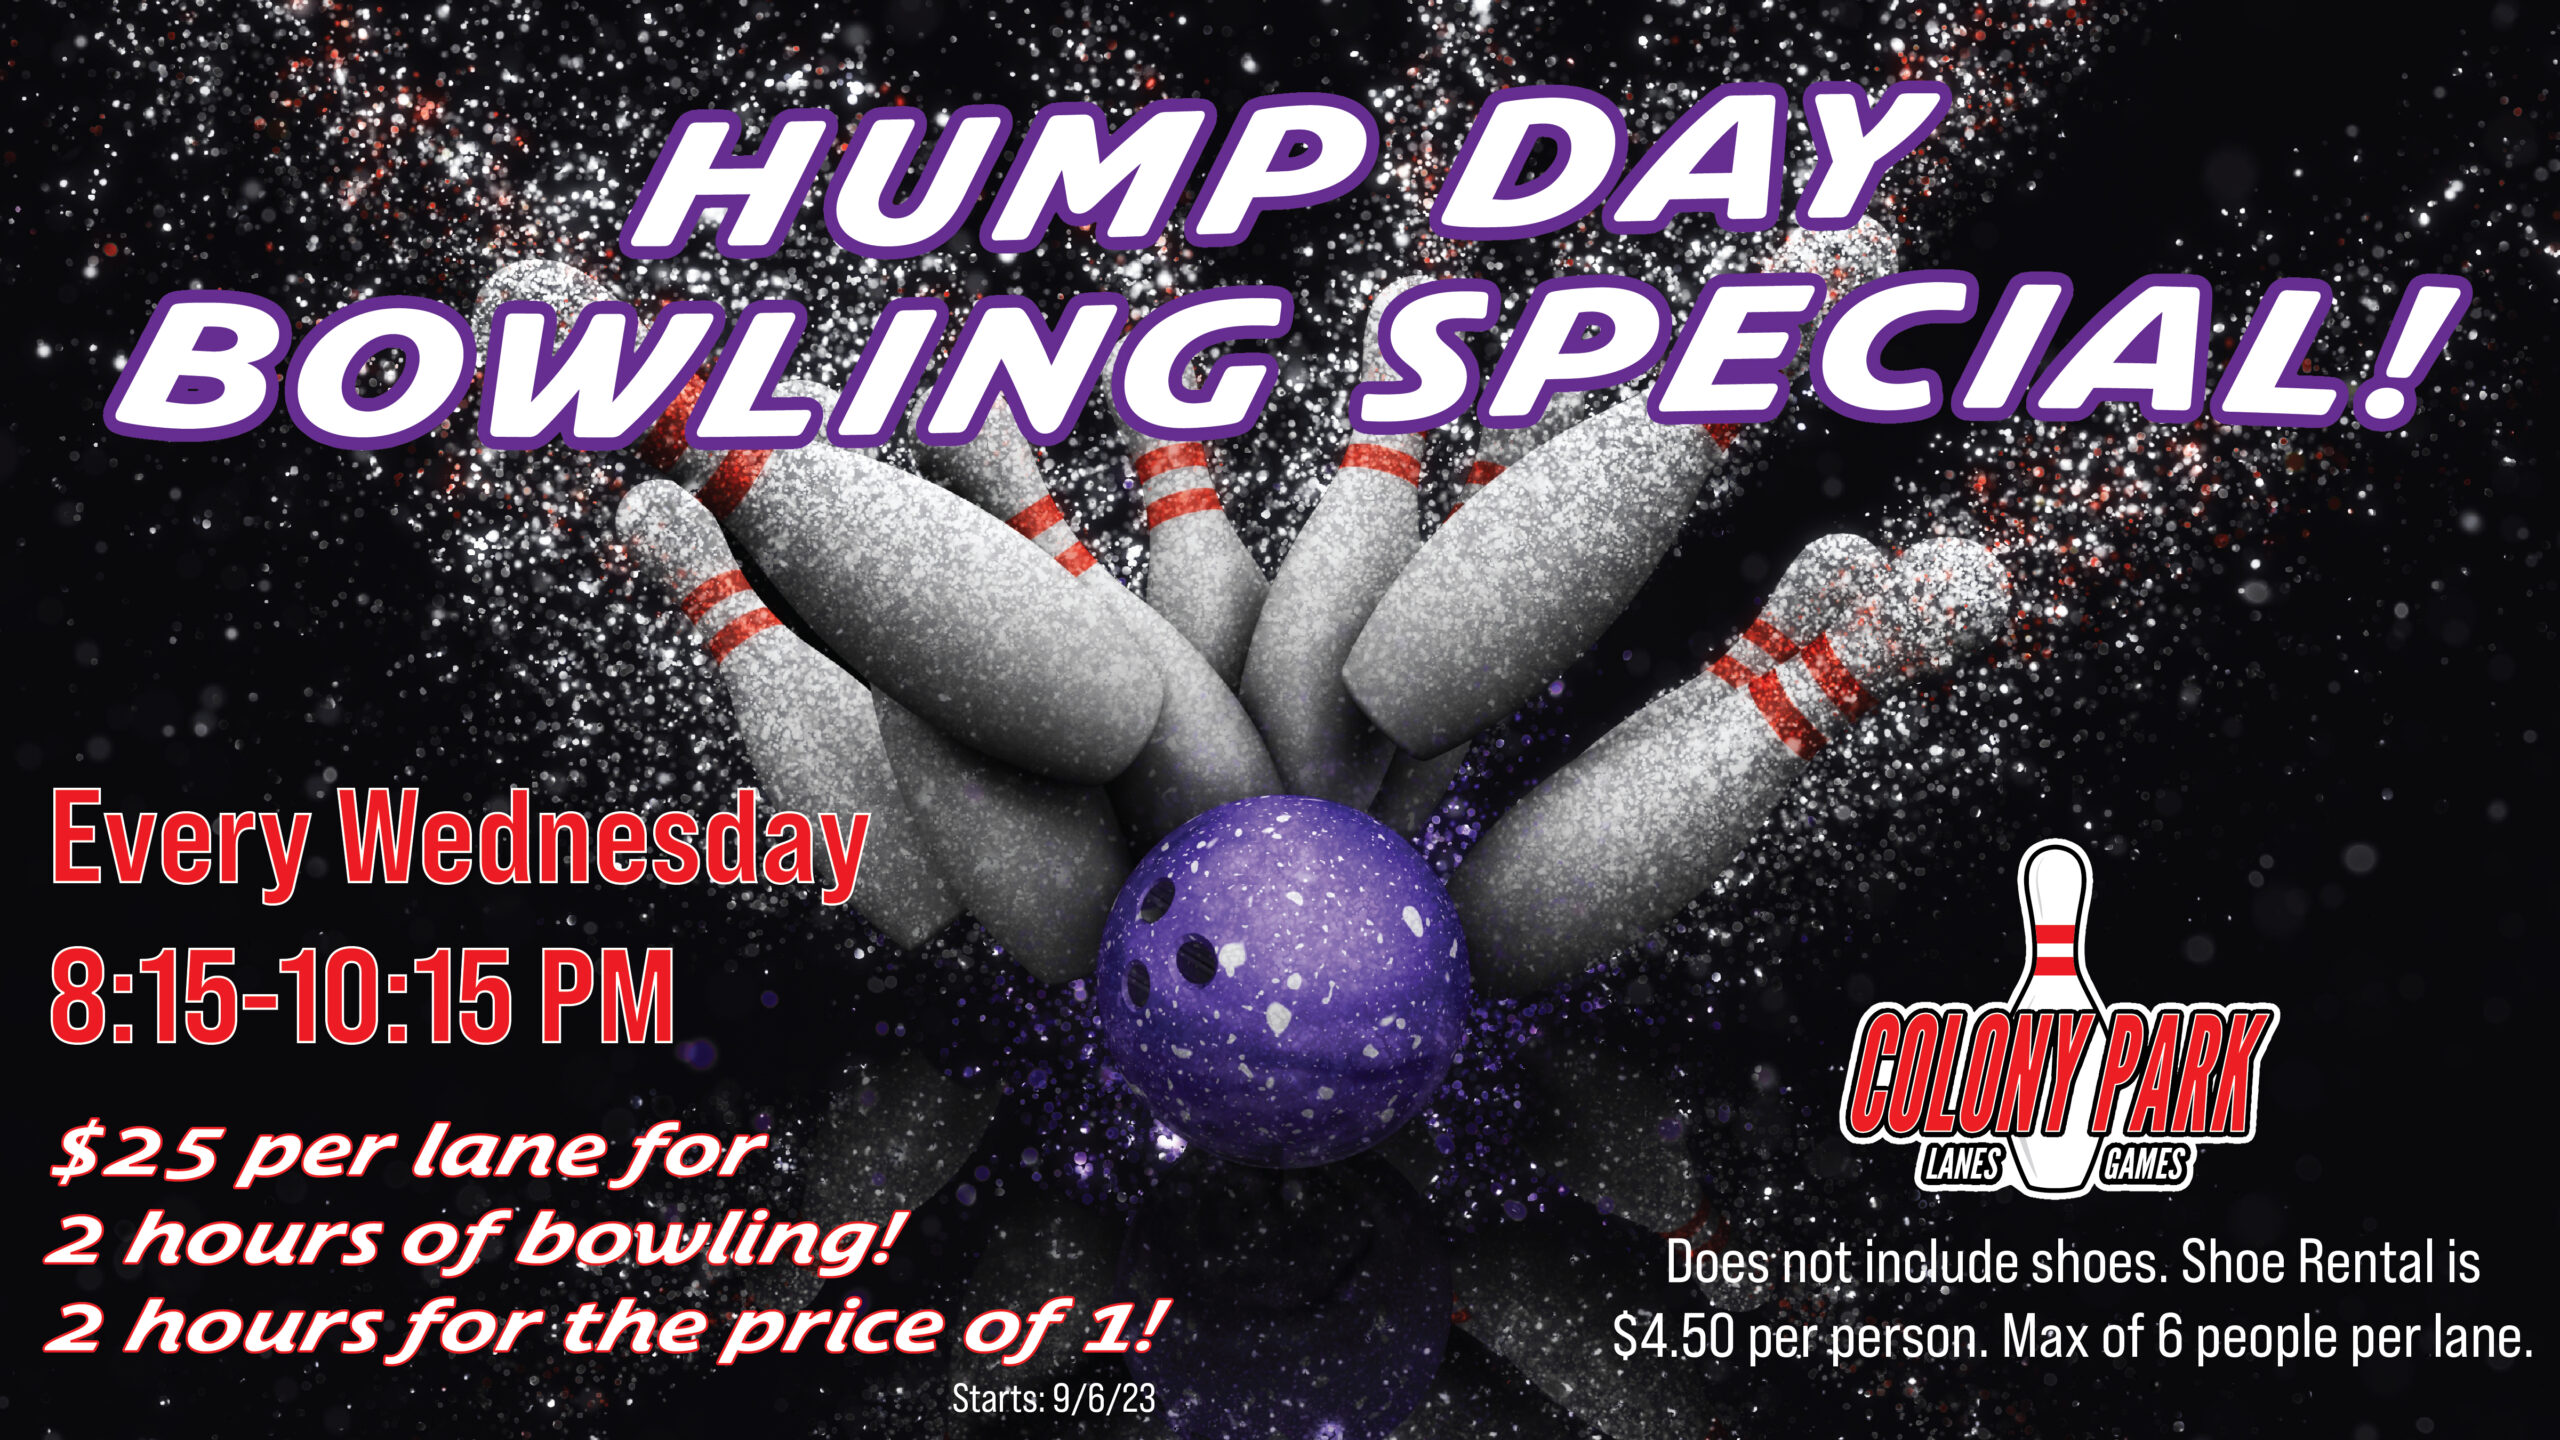 Wed Night Bowling Special!-02